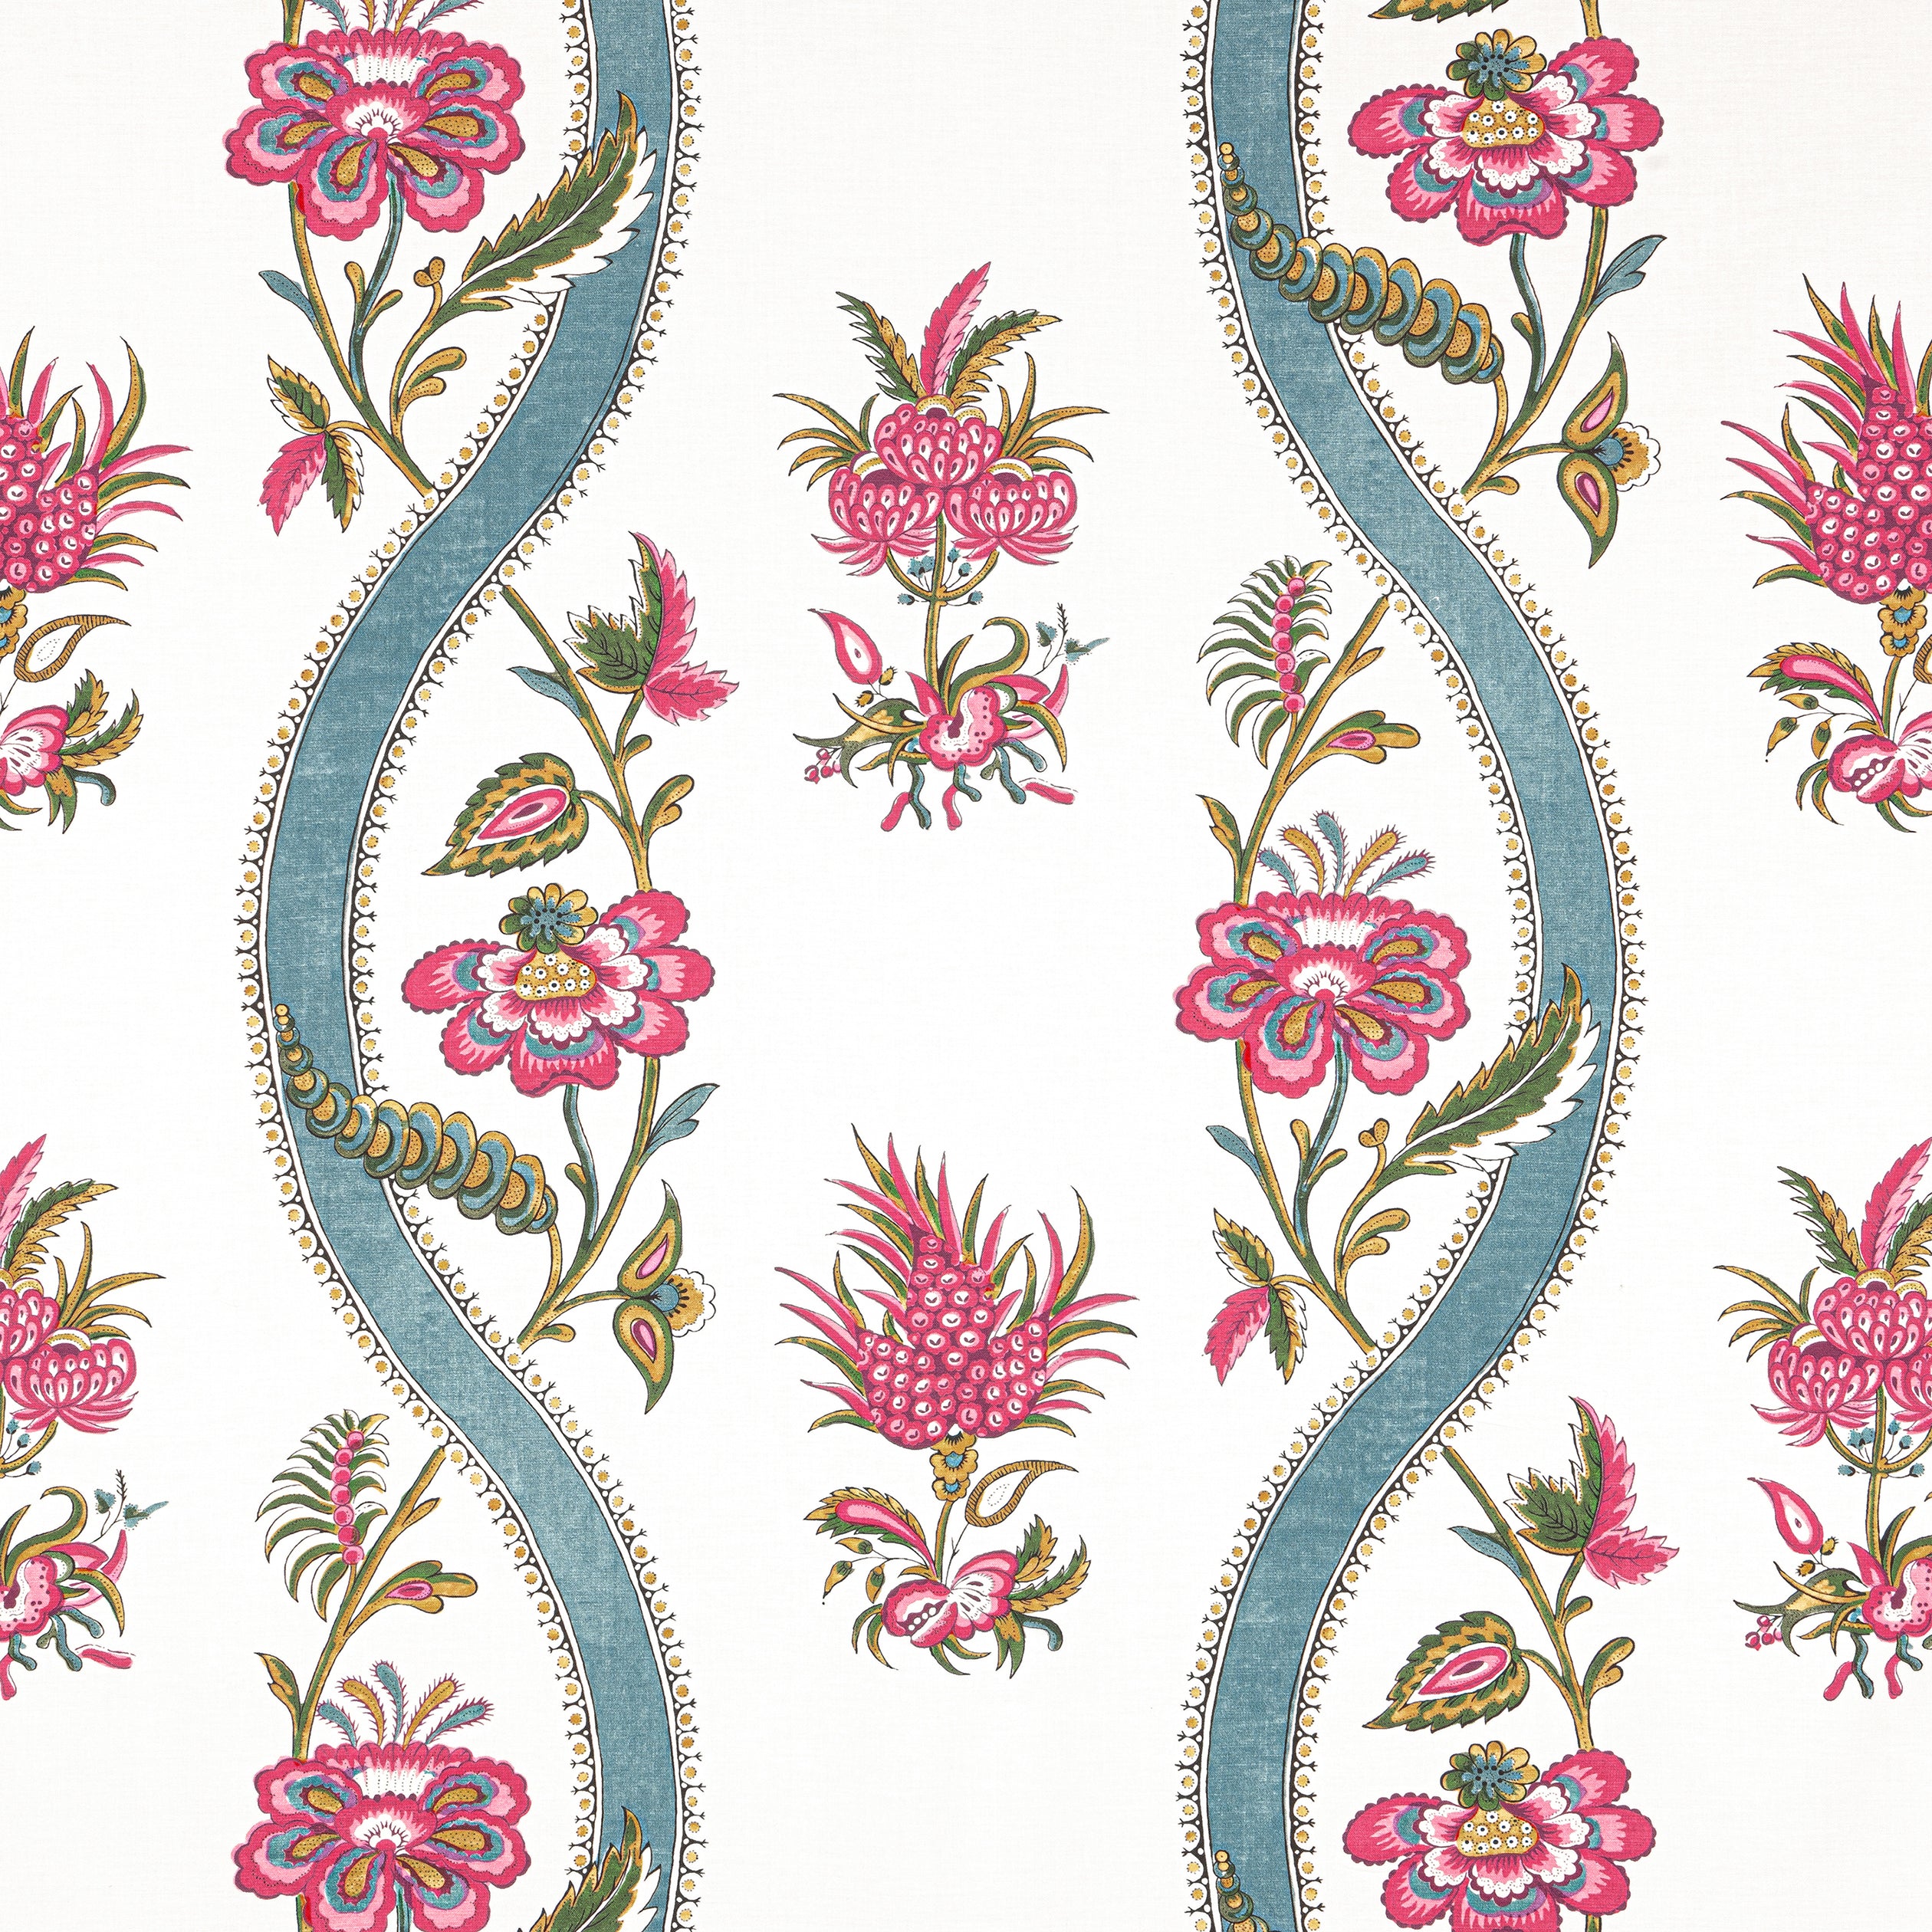 Ribbon Floral fabric in raspberry and teal color - pattern number F936426 - by Thibaut in the Indienne collection